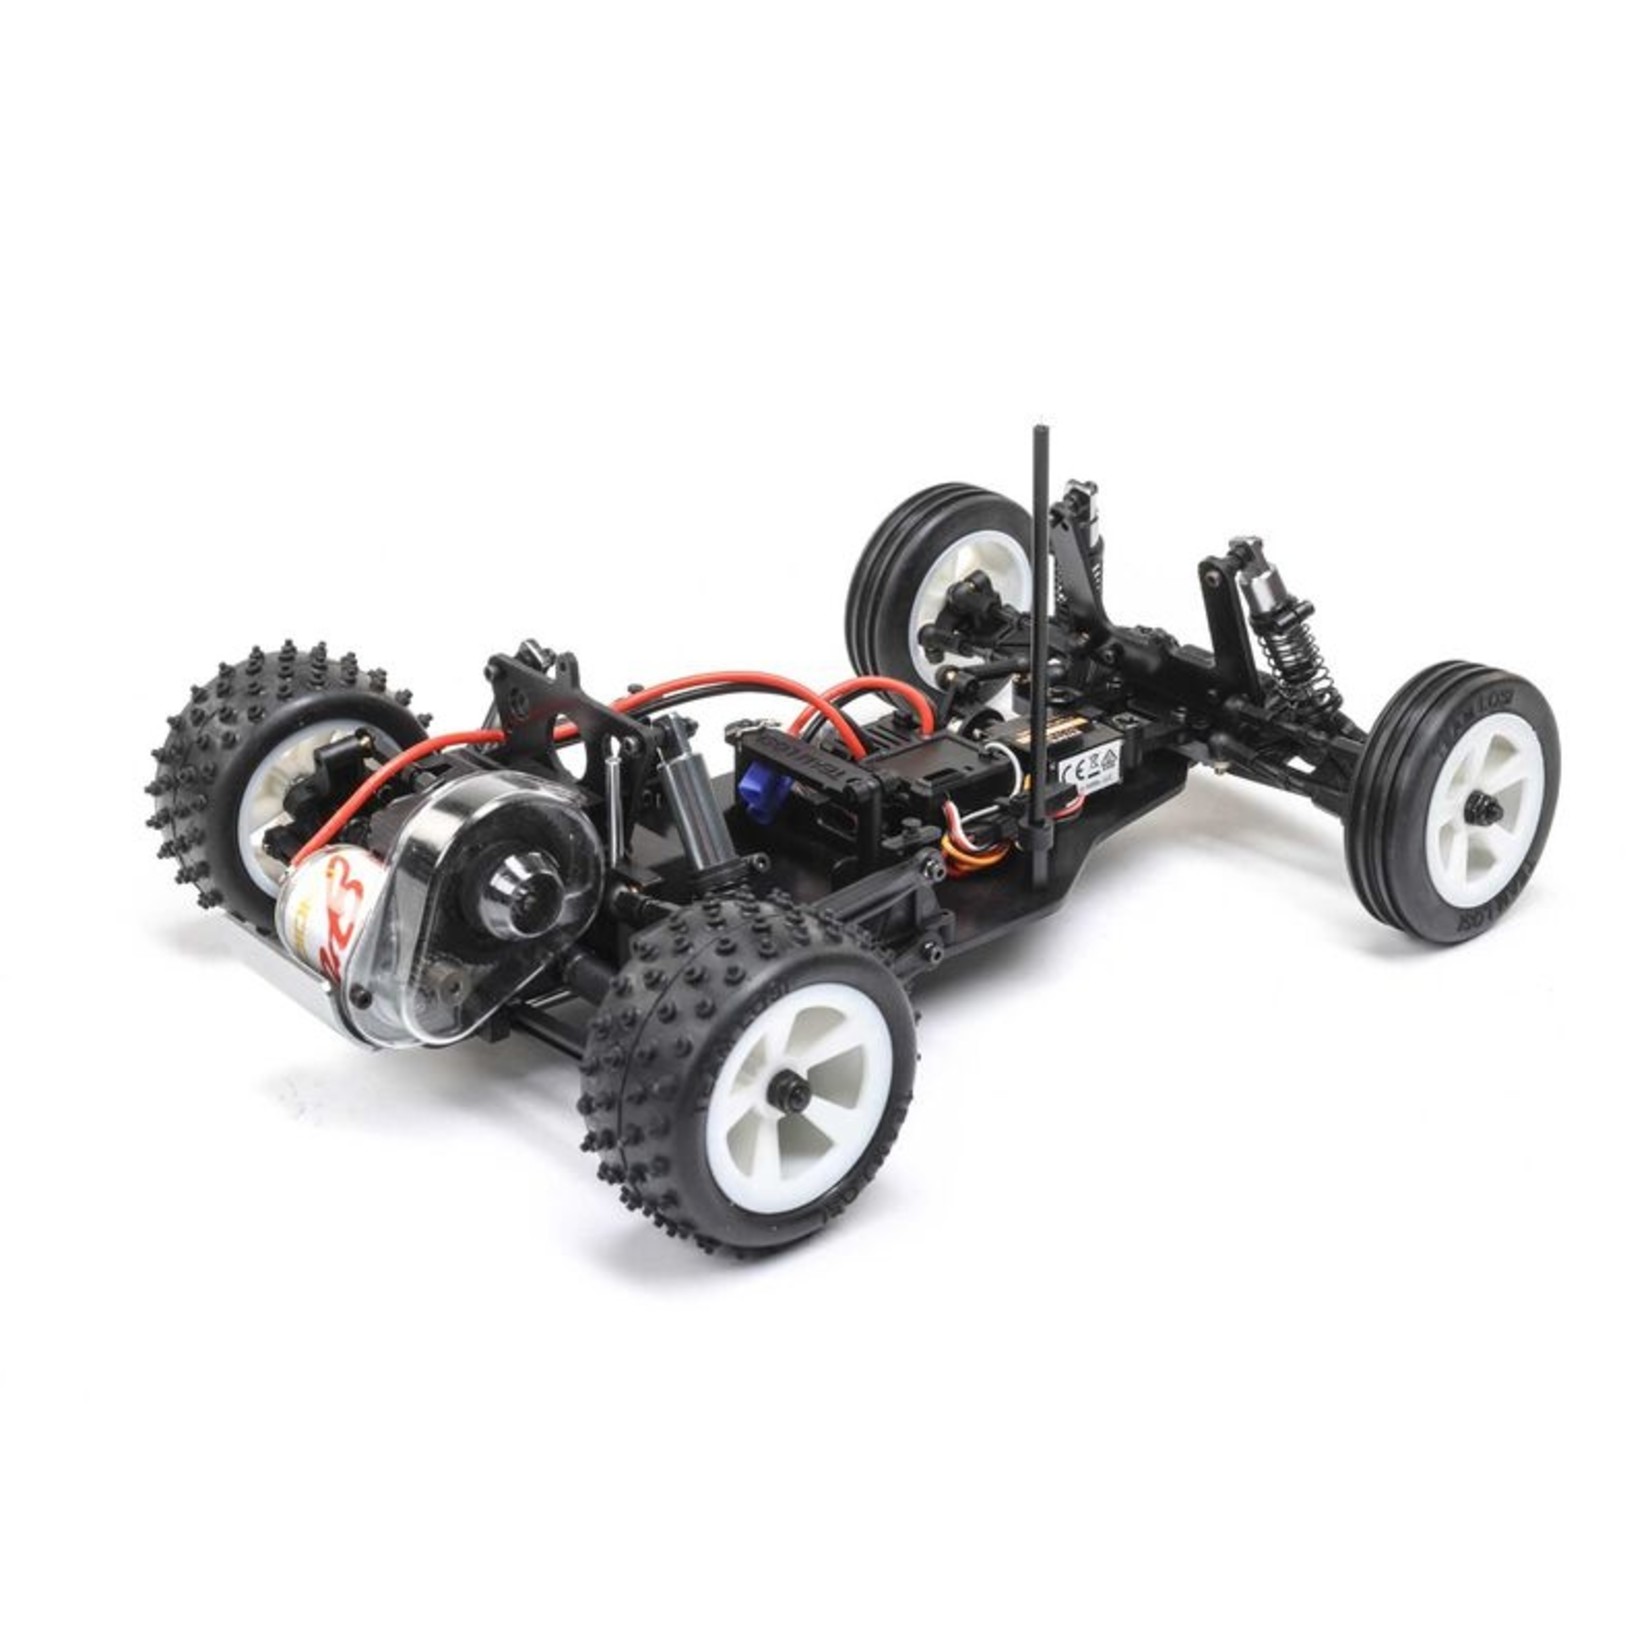 LOSI 1/16 Mini JRX2 Brushed 2WD Buggy RTR, Red